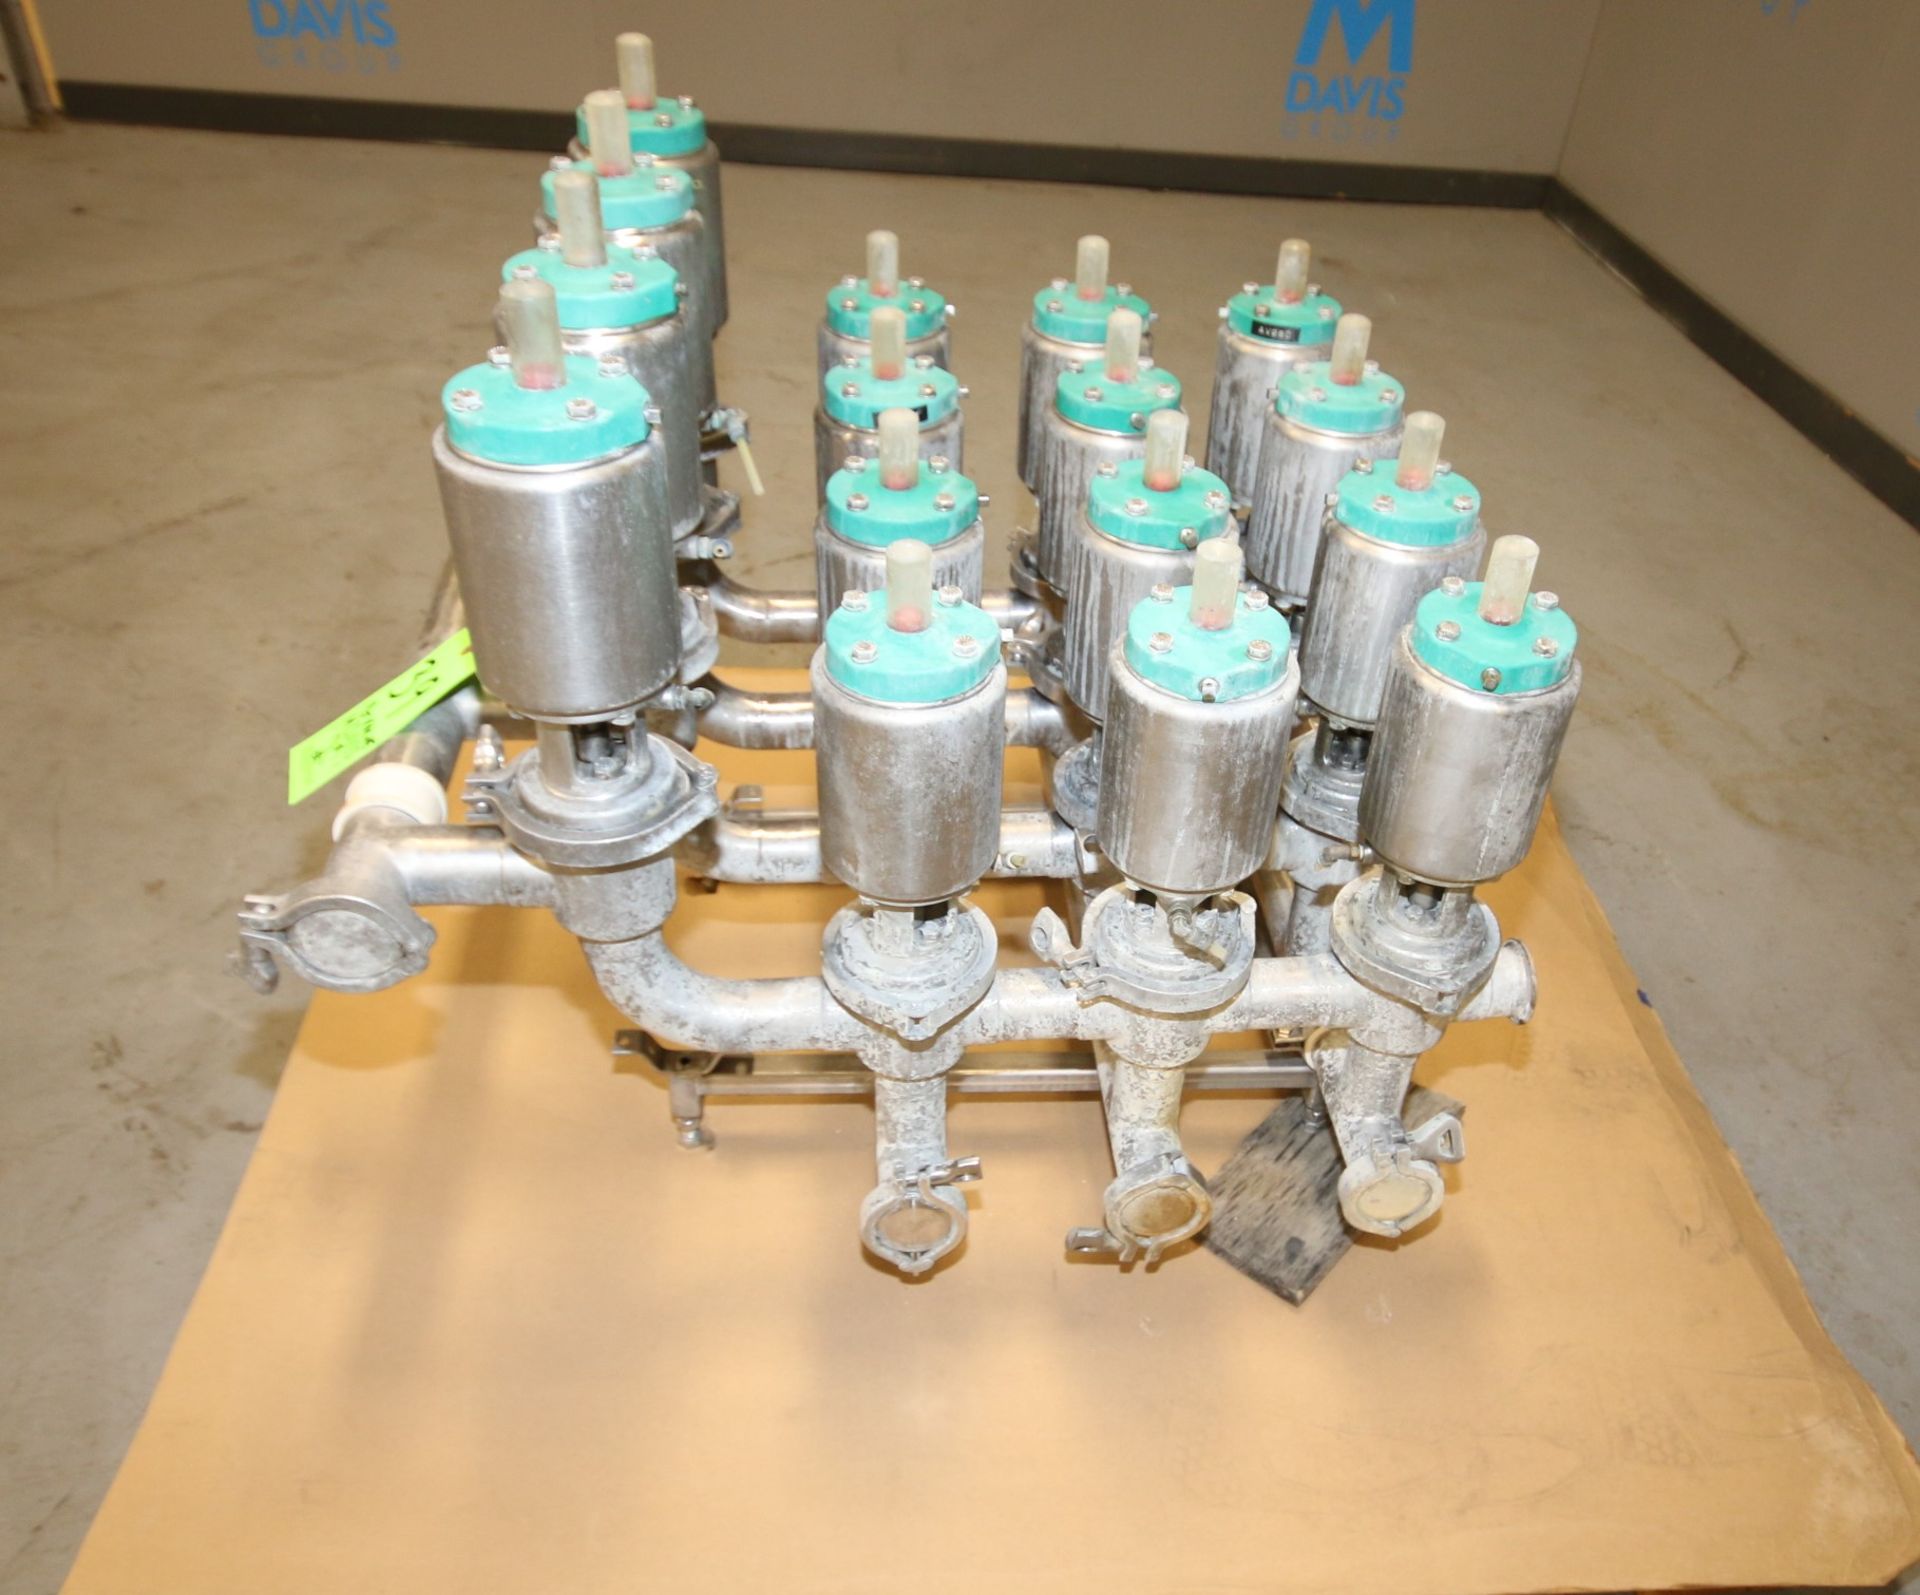 16-Valve Tri-Clover 2" S/S Air Valve Manifold / Cluster, with Model 761 Valves - Image 2 of 4